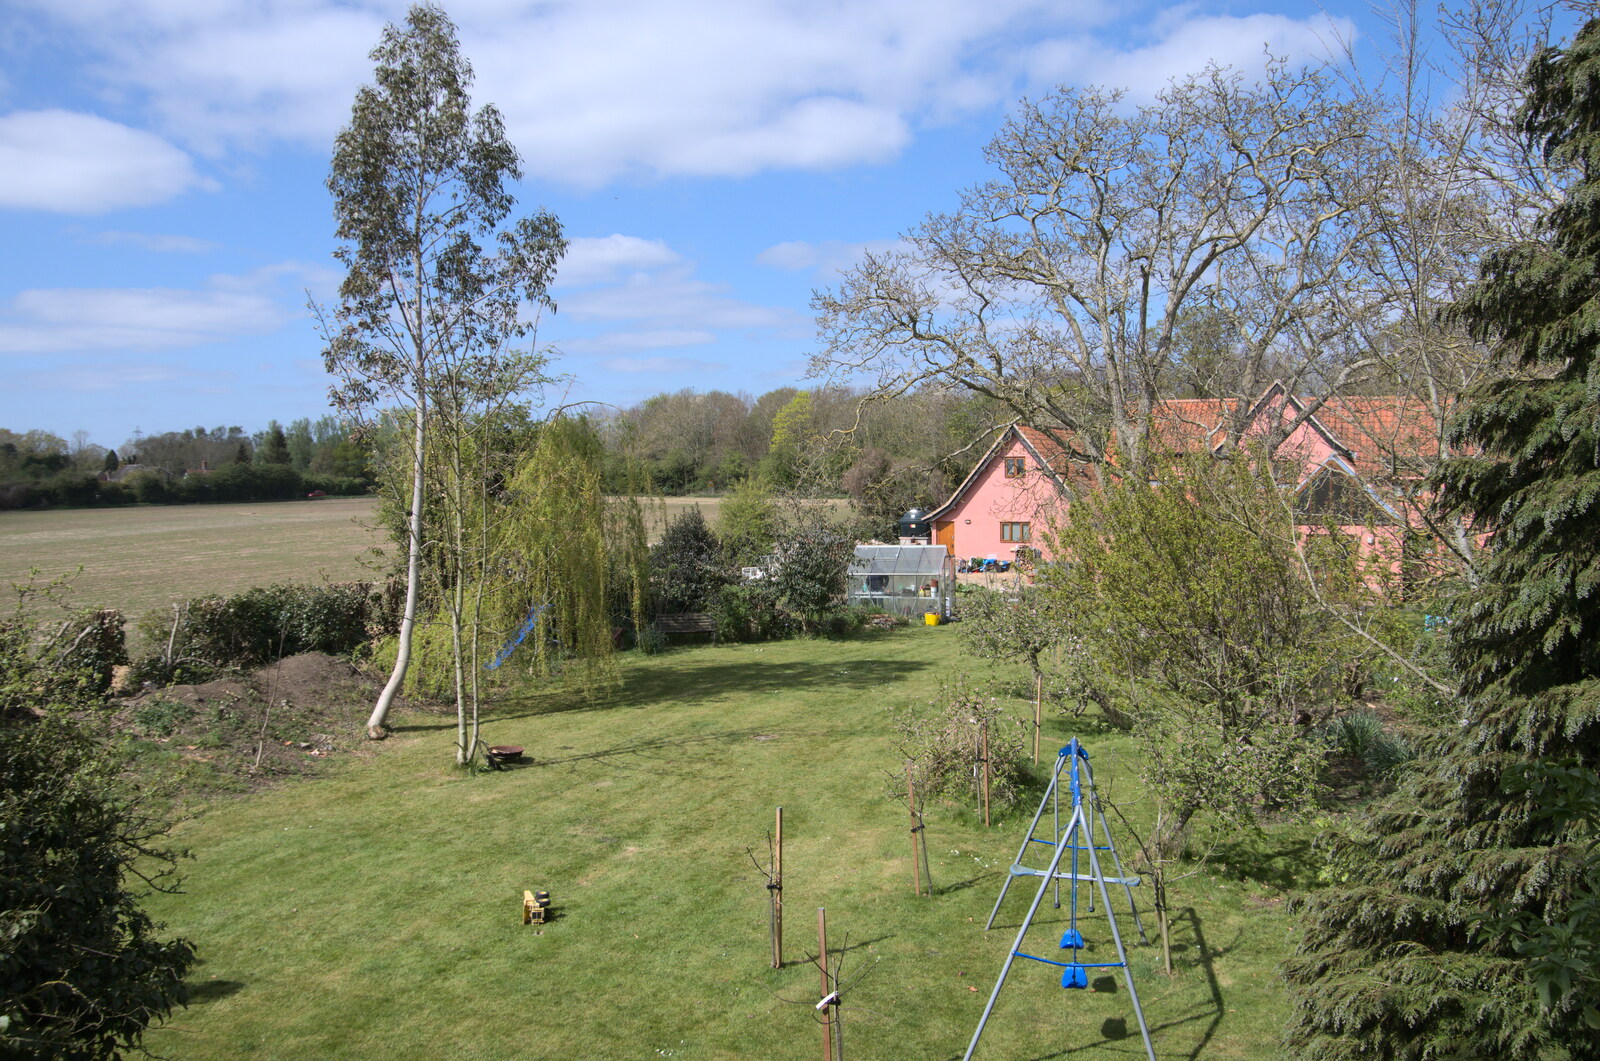 The view from the tree house from A Weekend Camping Trip in the Garden, Brome, Suffolk - 11th April 2020